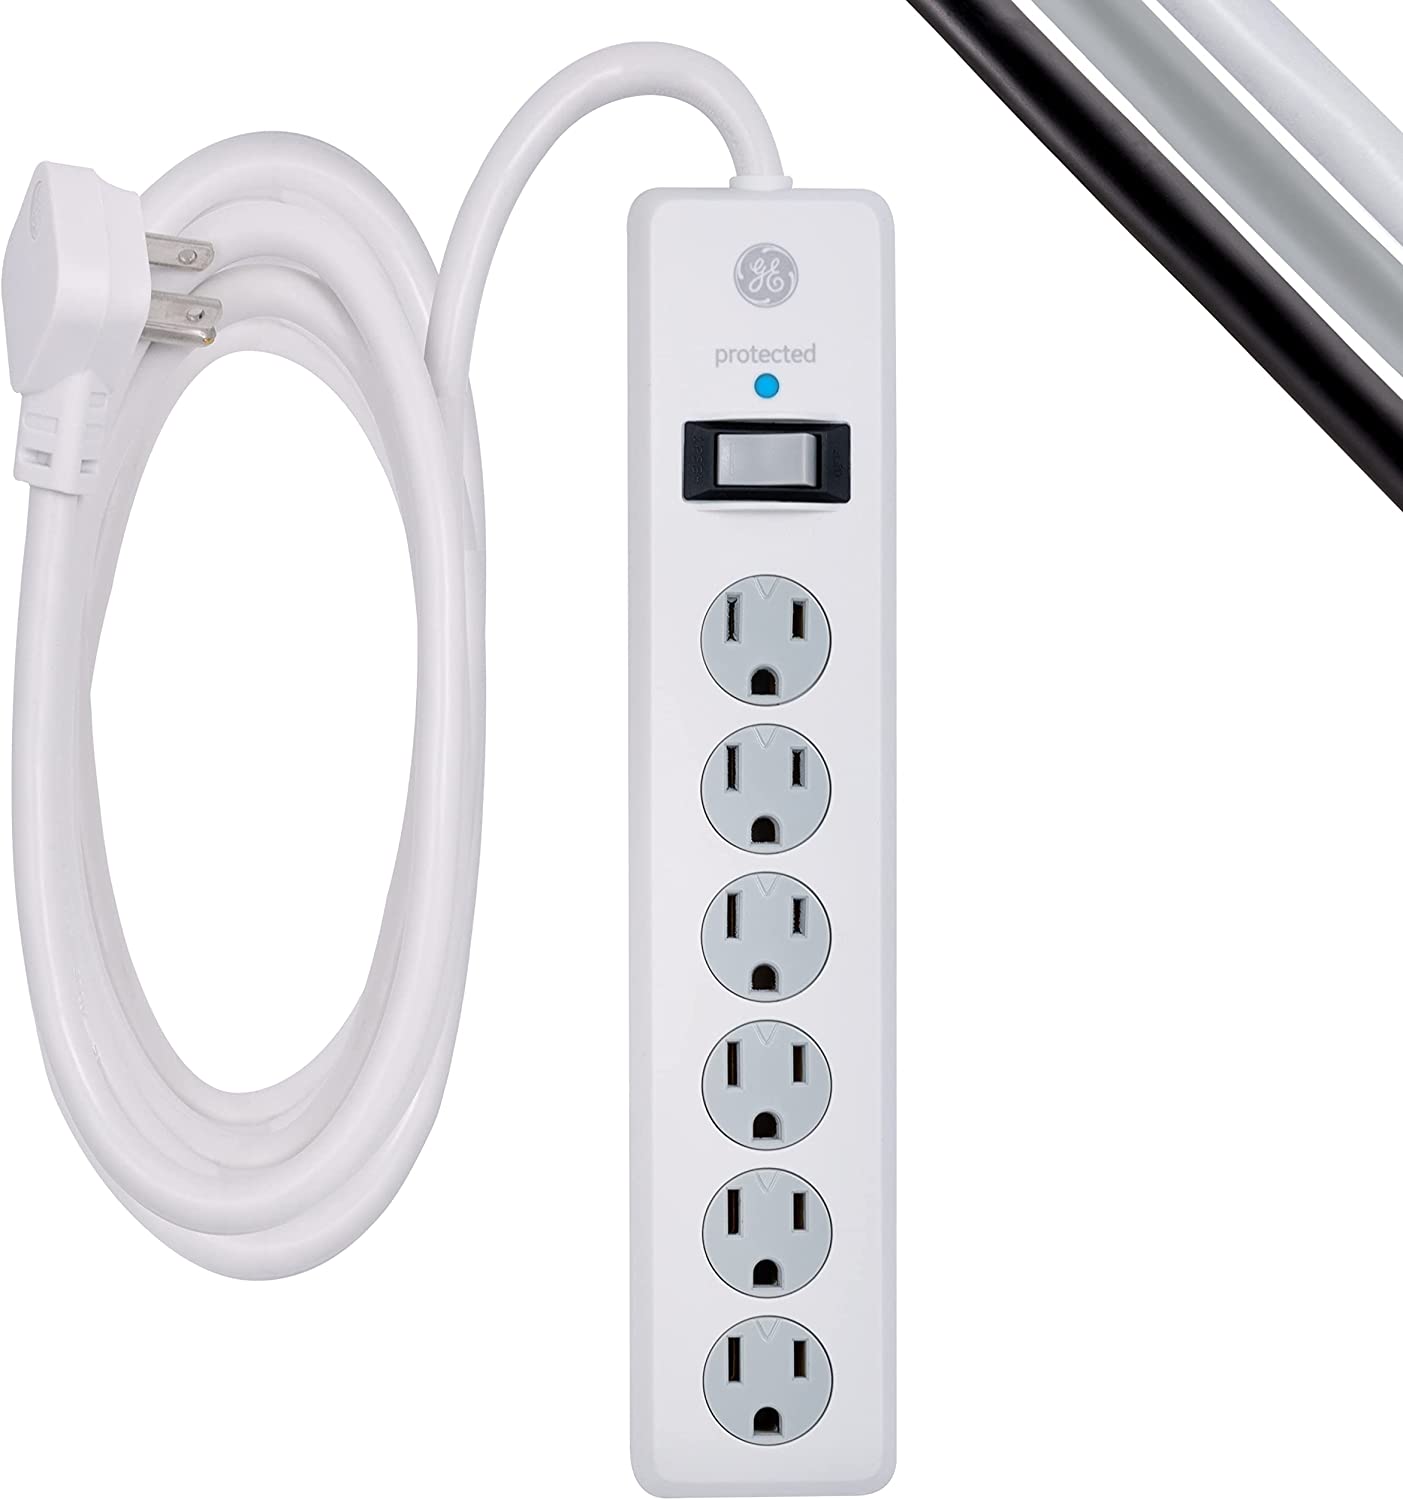  1. GE 6 Outlet Power Strip 